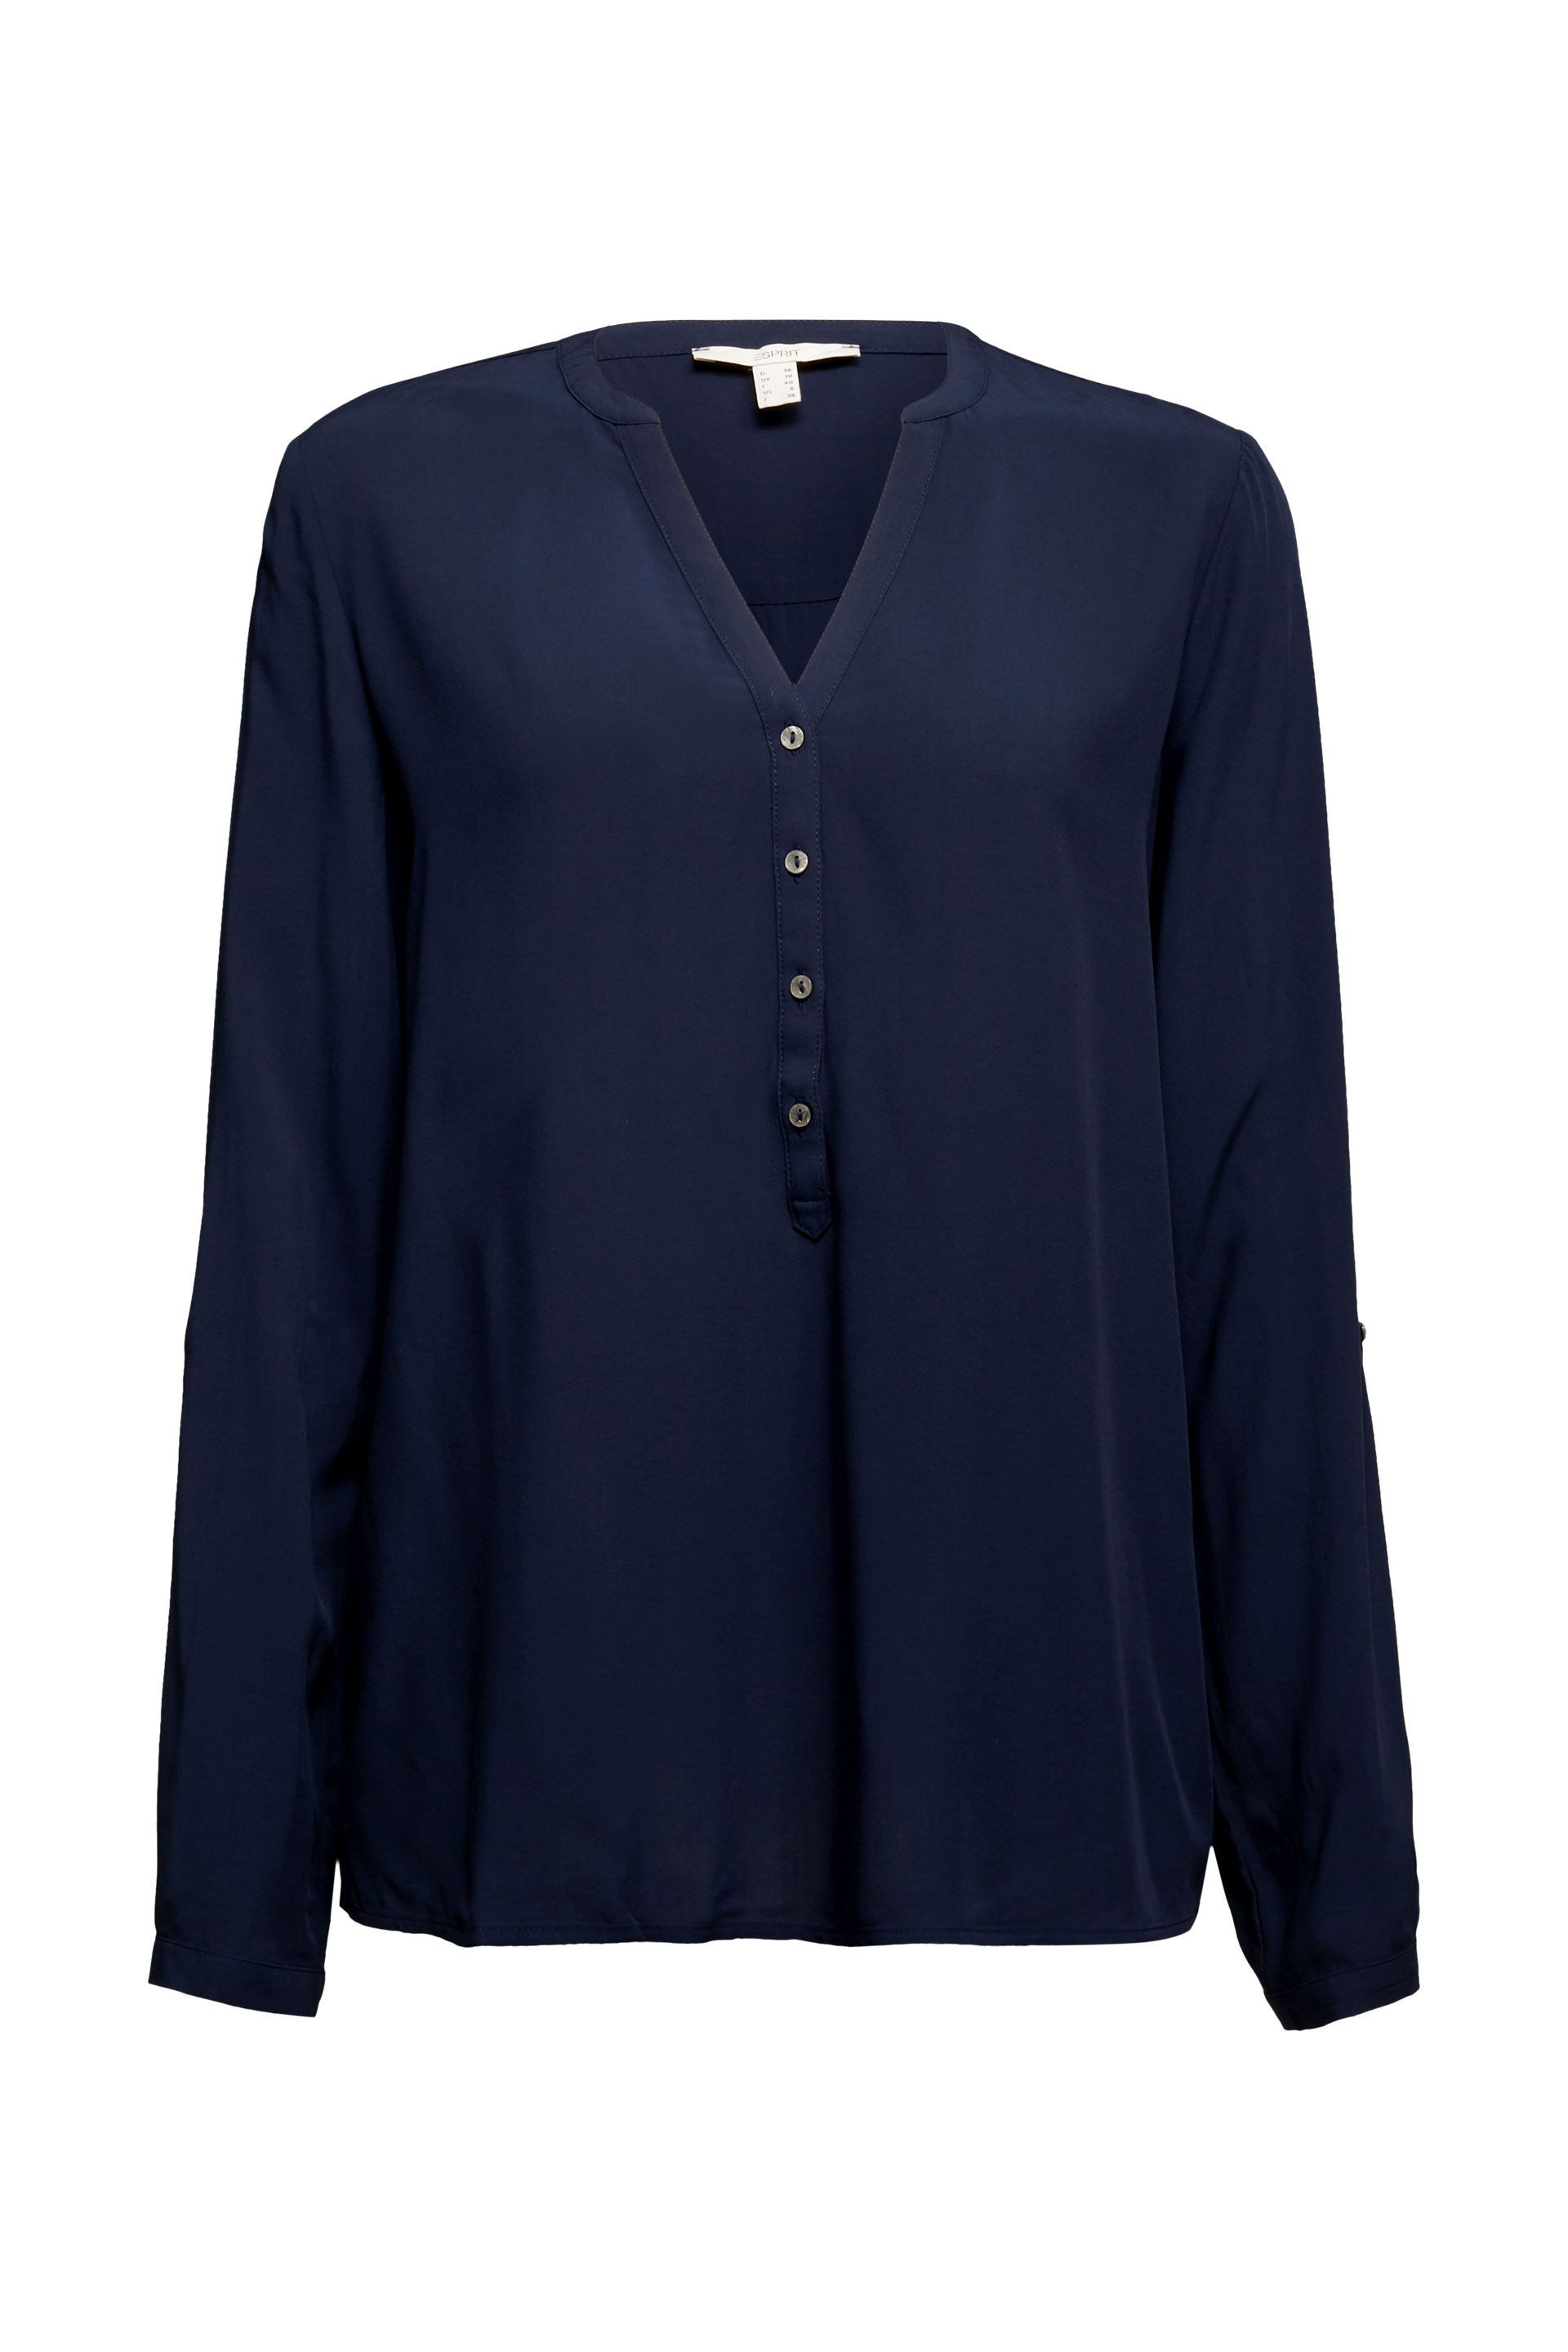 Blouse with adjustable sleeves, Blue, large image number 0